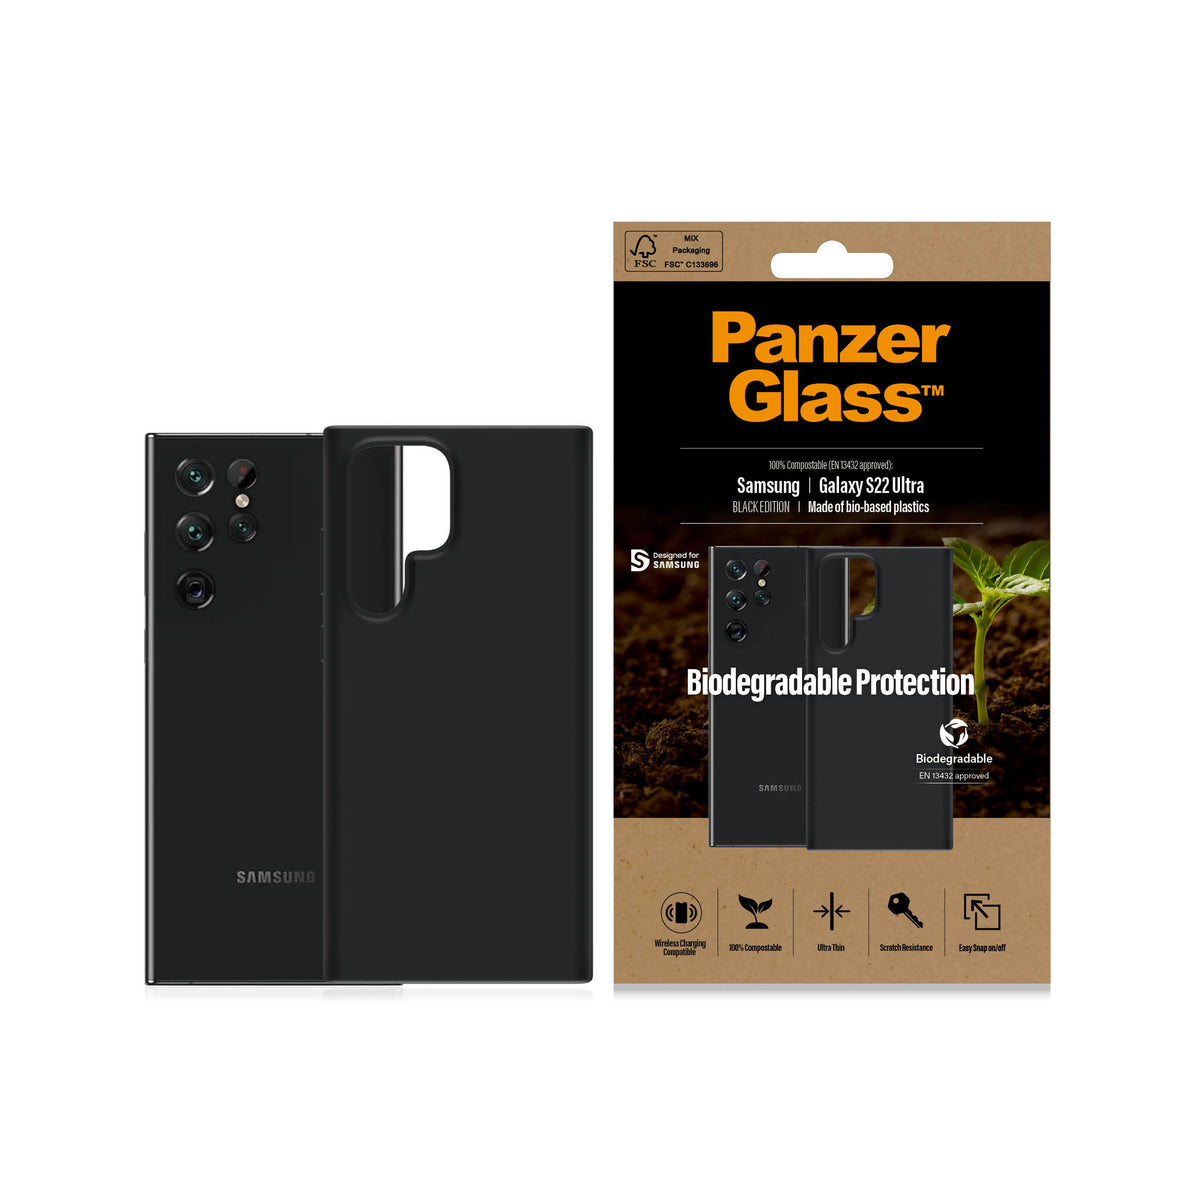 PanzerGlass ® Biodegradable Case for Galaxy S22 Ultra in Black